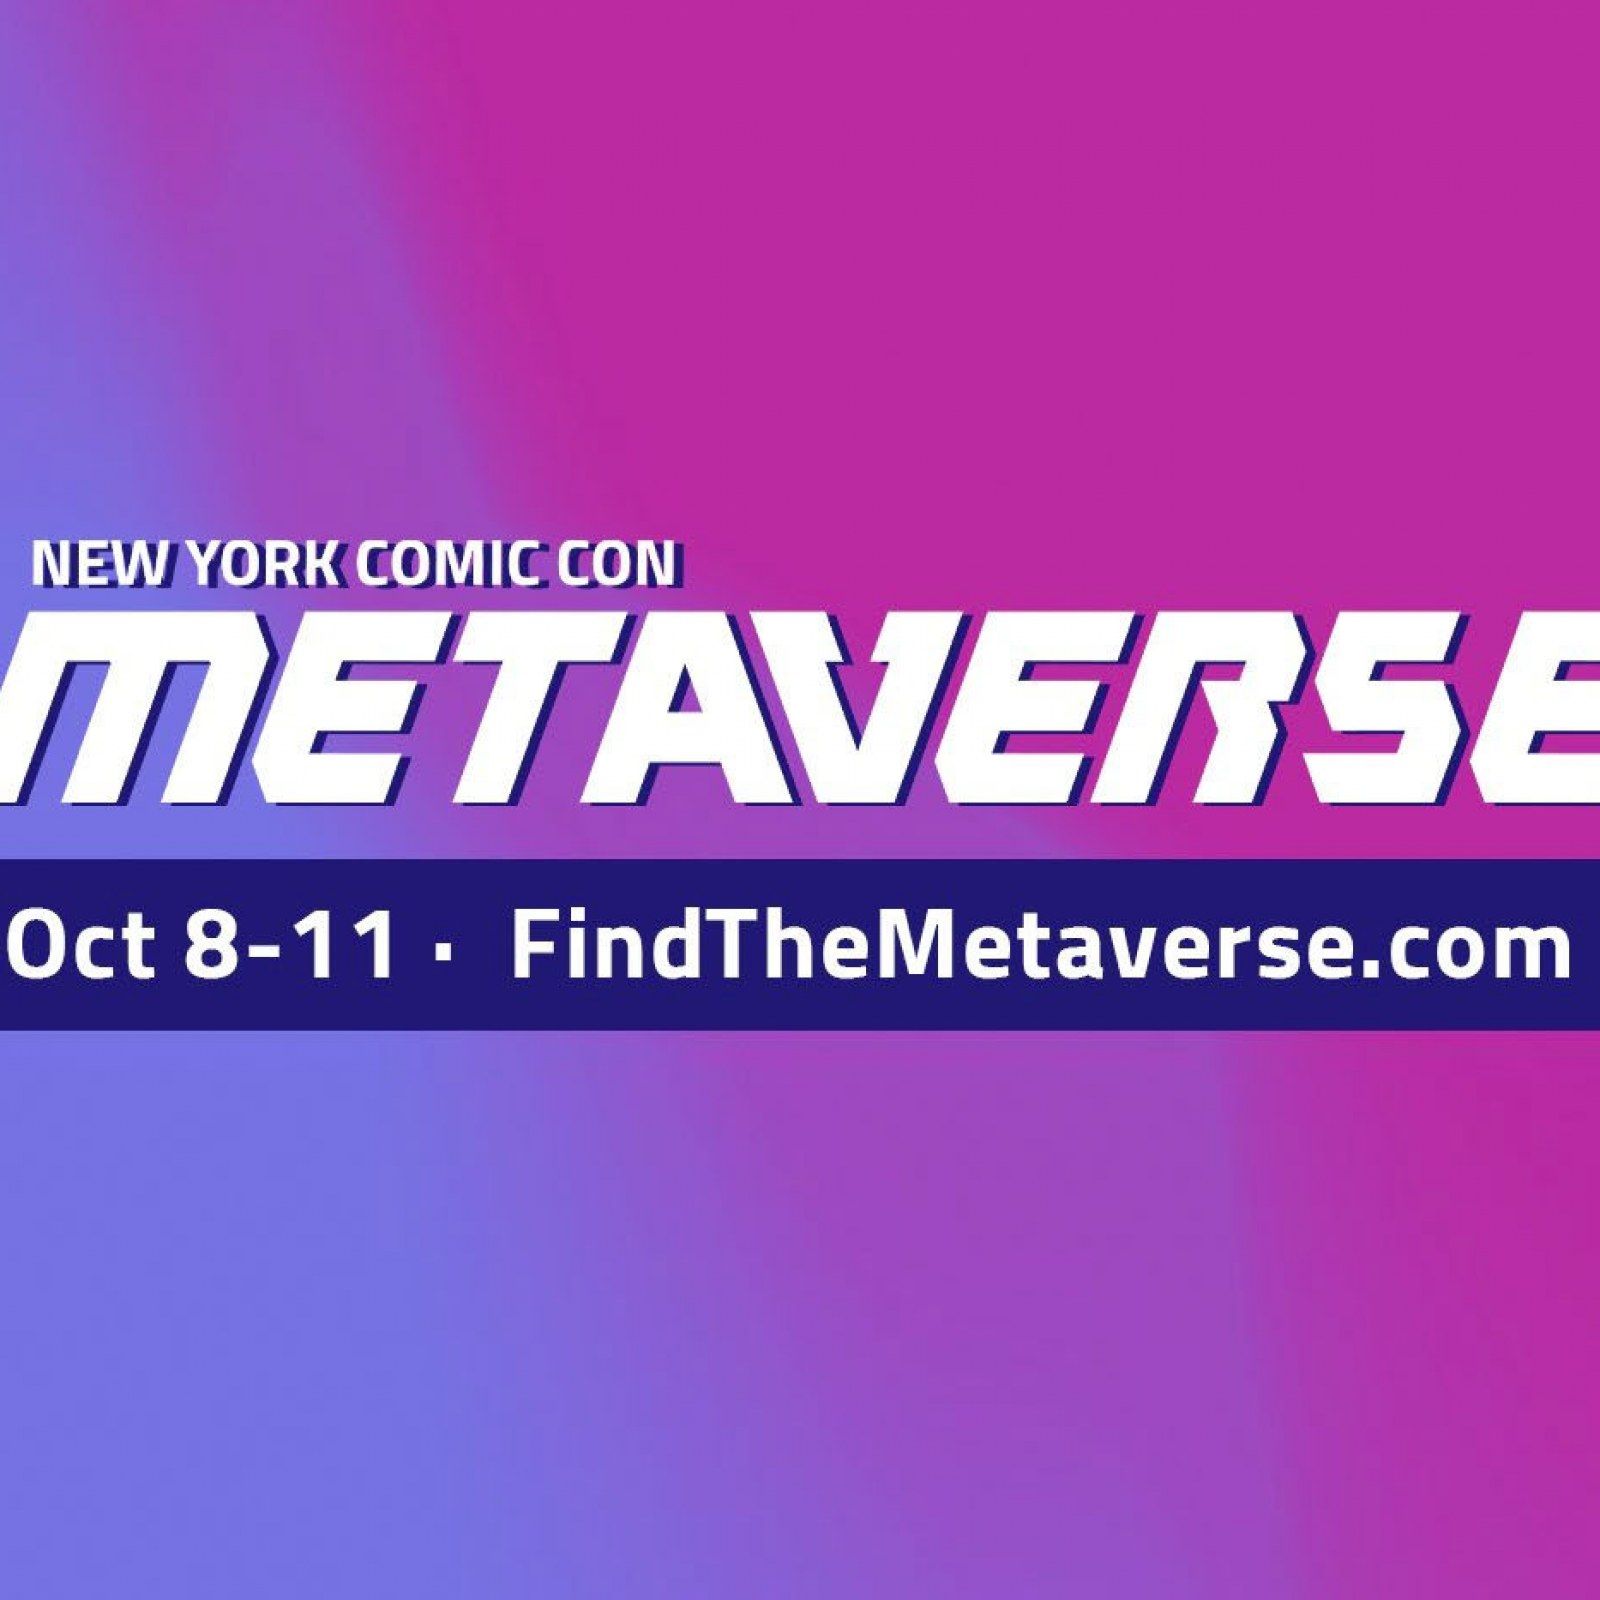 NYCC 2020 Metaverse Schedule & How to Watch Panels Online